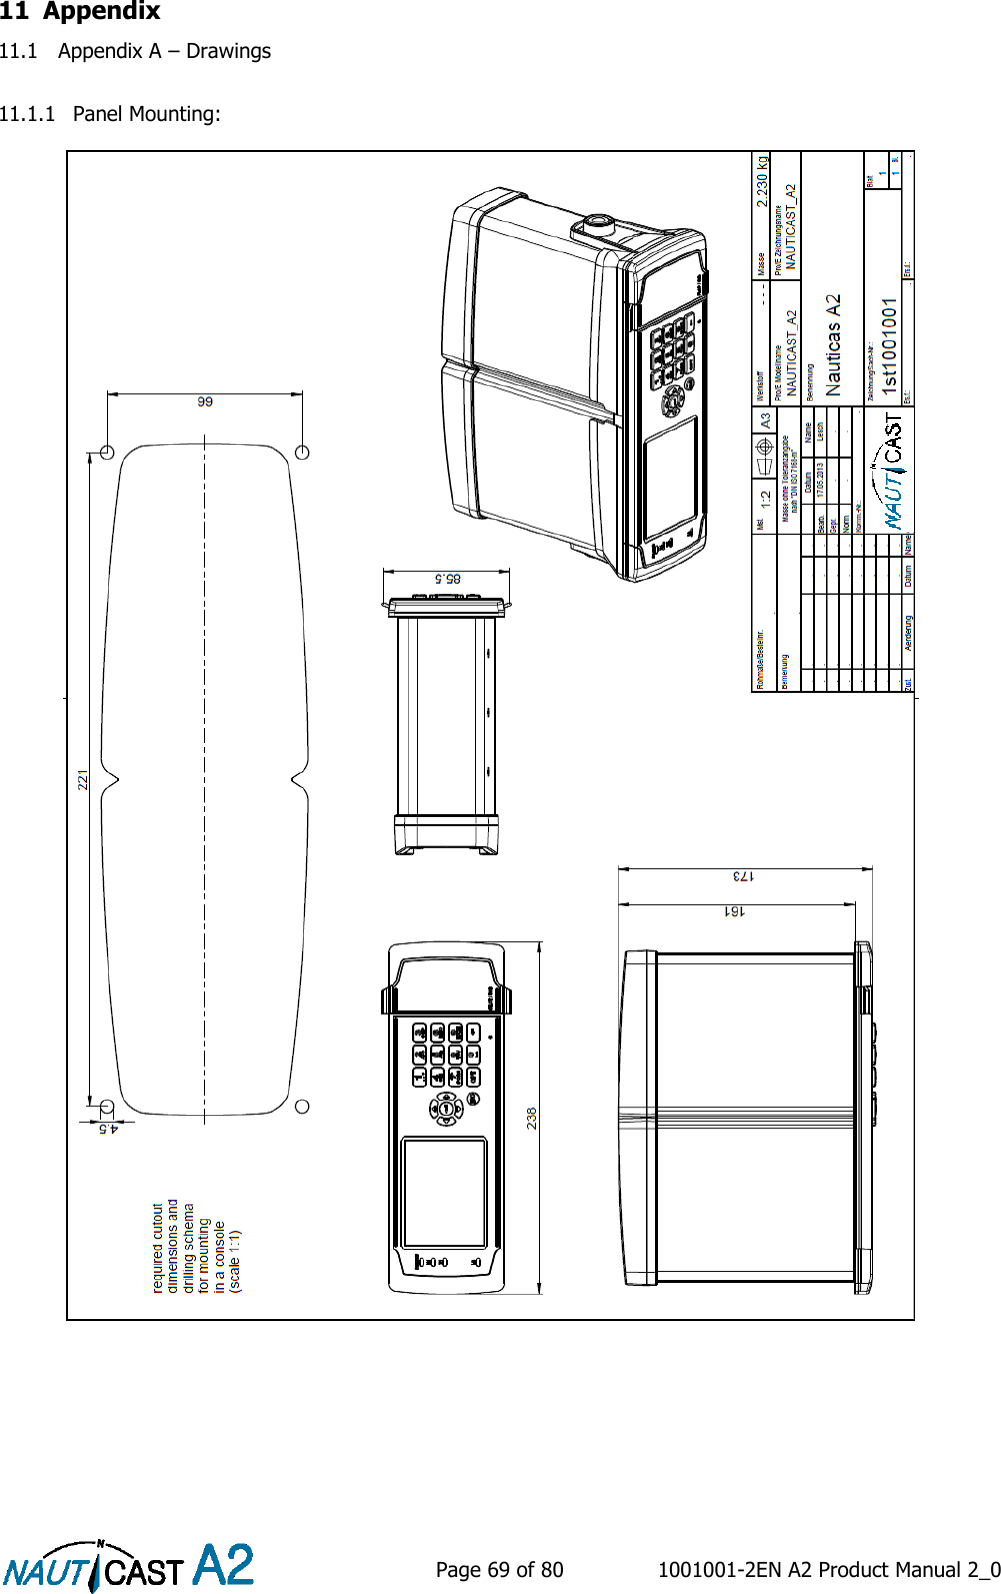    Page 69 of 80  1001001-2EN A2 Product Manual 2_0   11 Appendix 11.1 Appendix A – Drawings  11.1.1 Panel Mounting:     